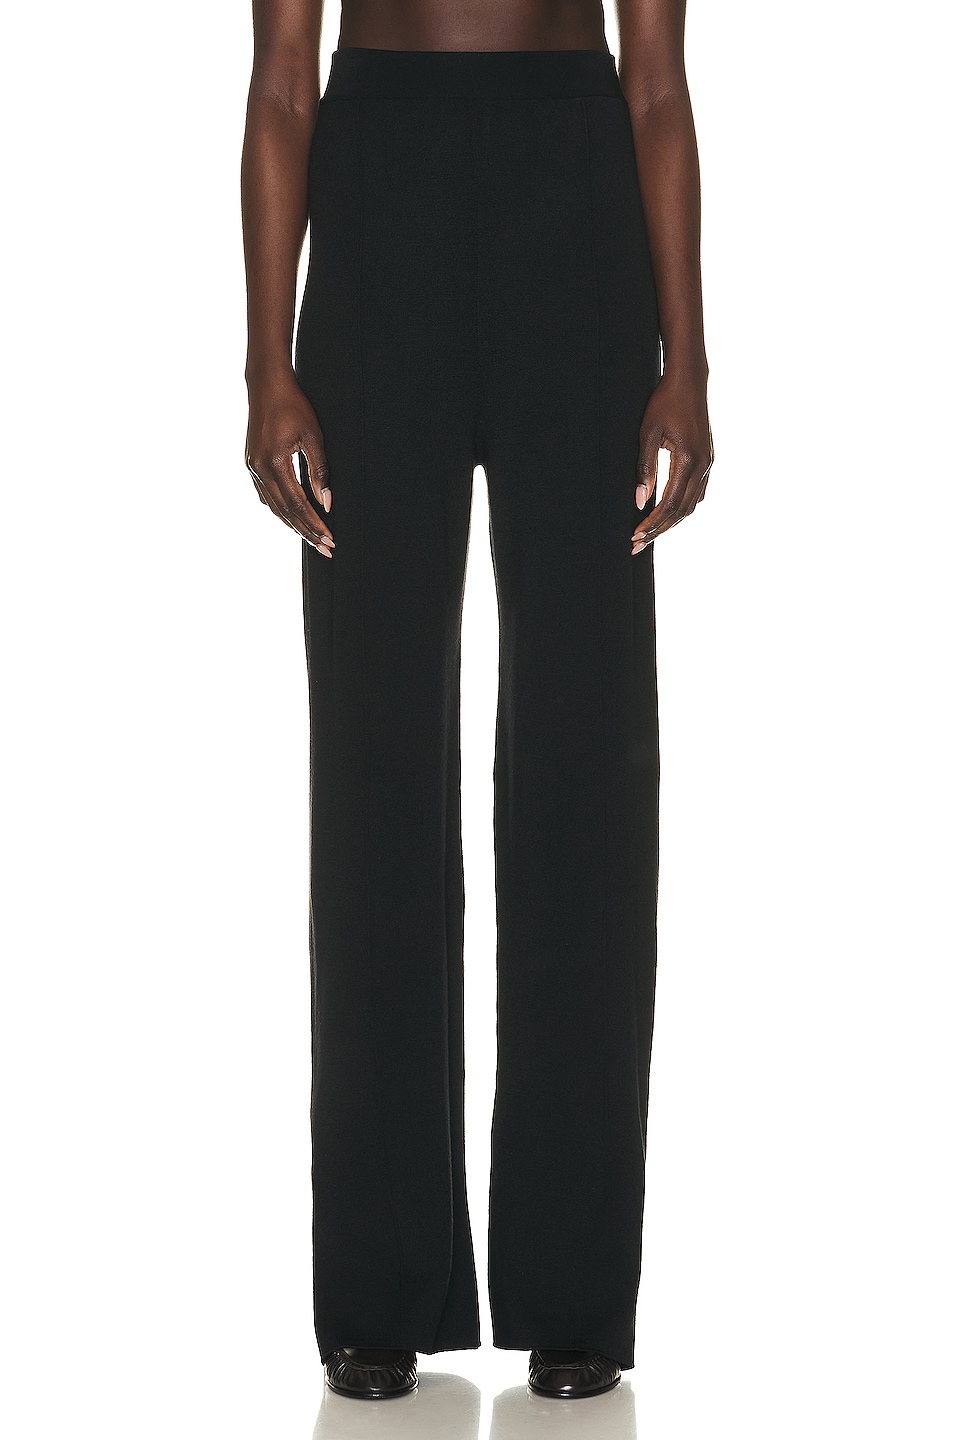 Image 1 of The Row Egle Pant in Black & Navy